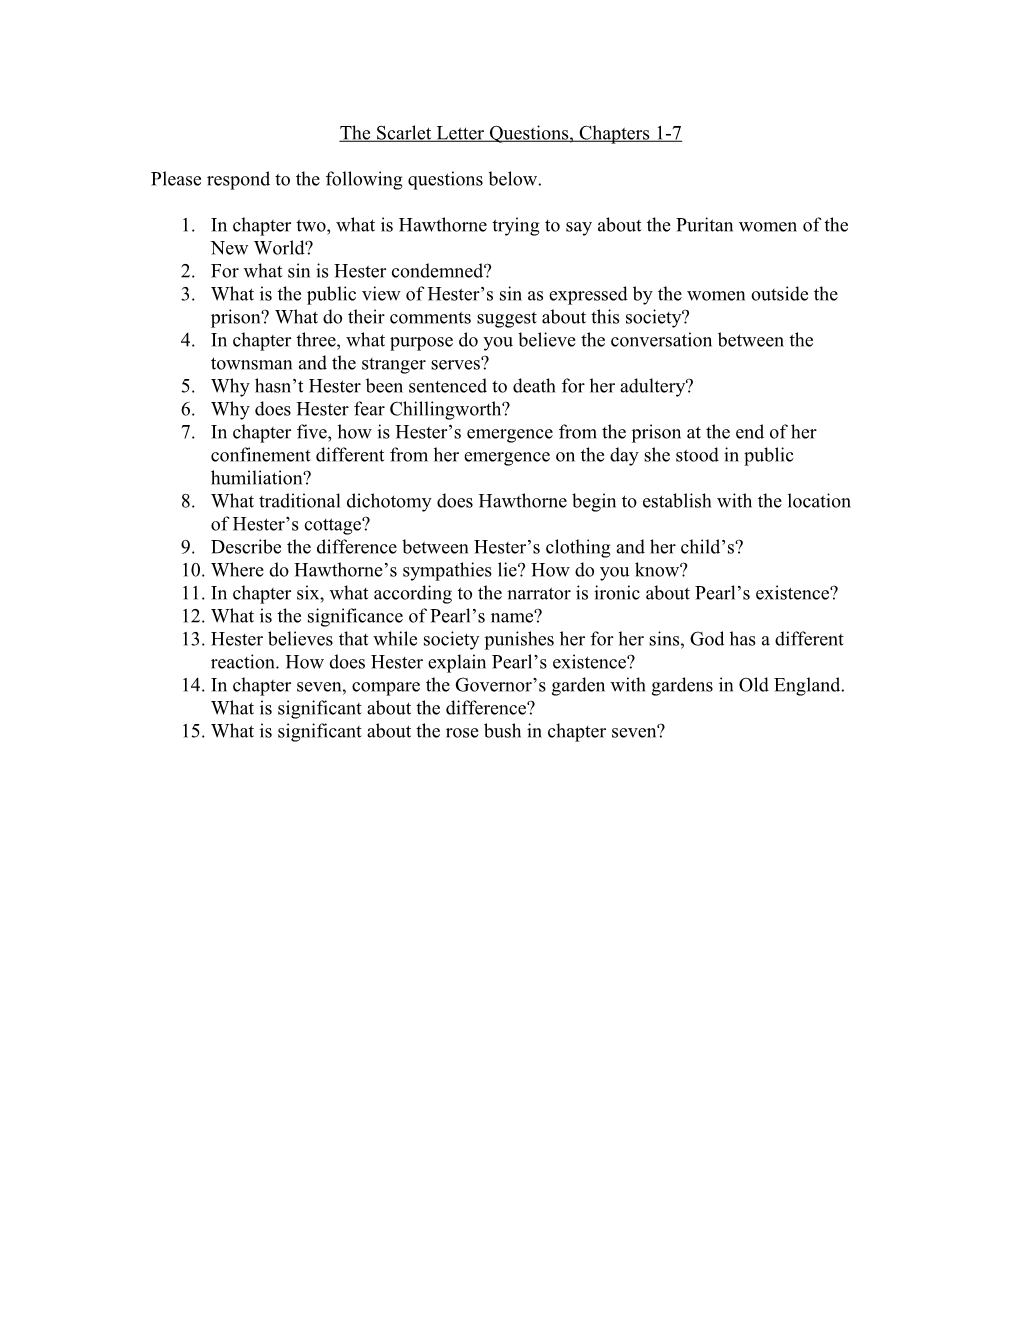 The Scarlet Letter Questions, Chapters 1-7